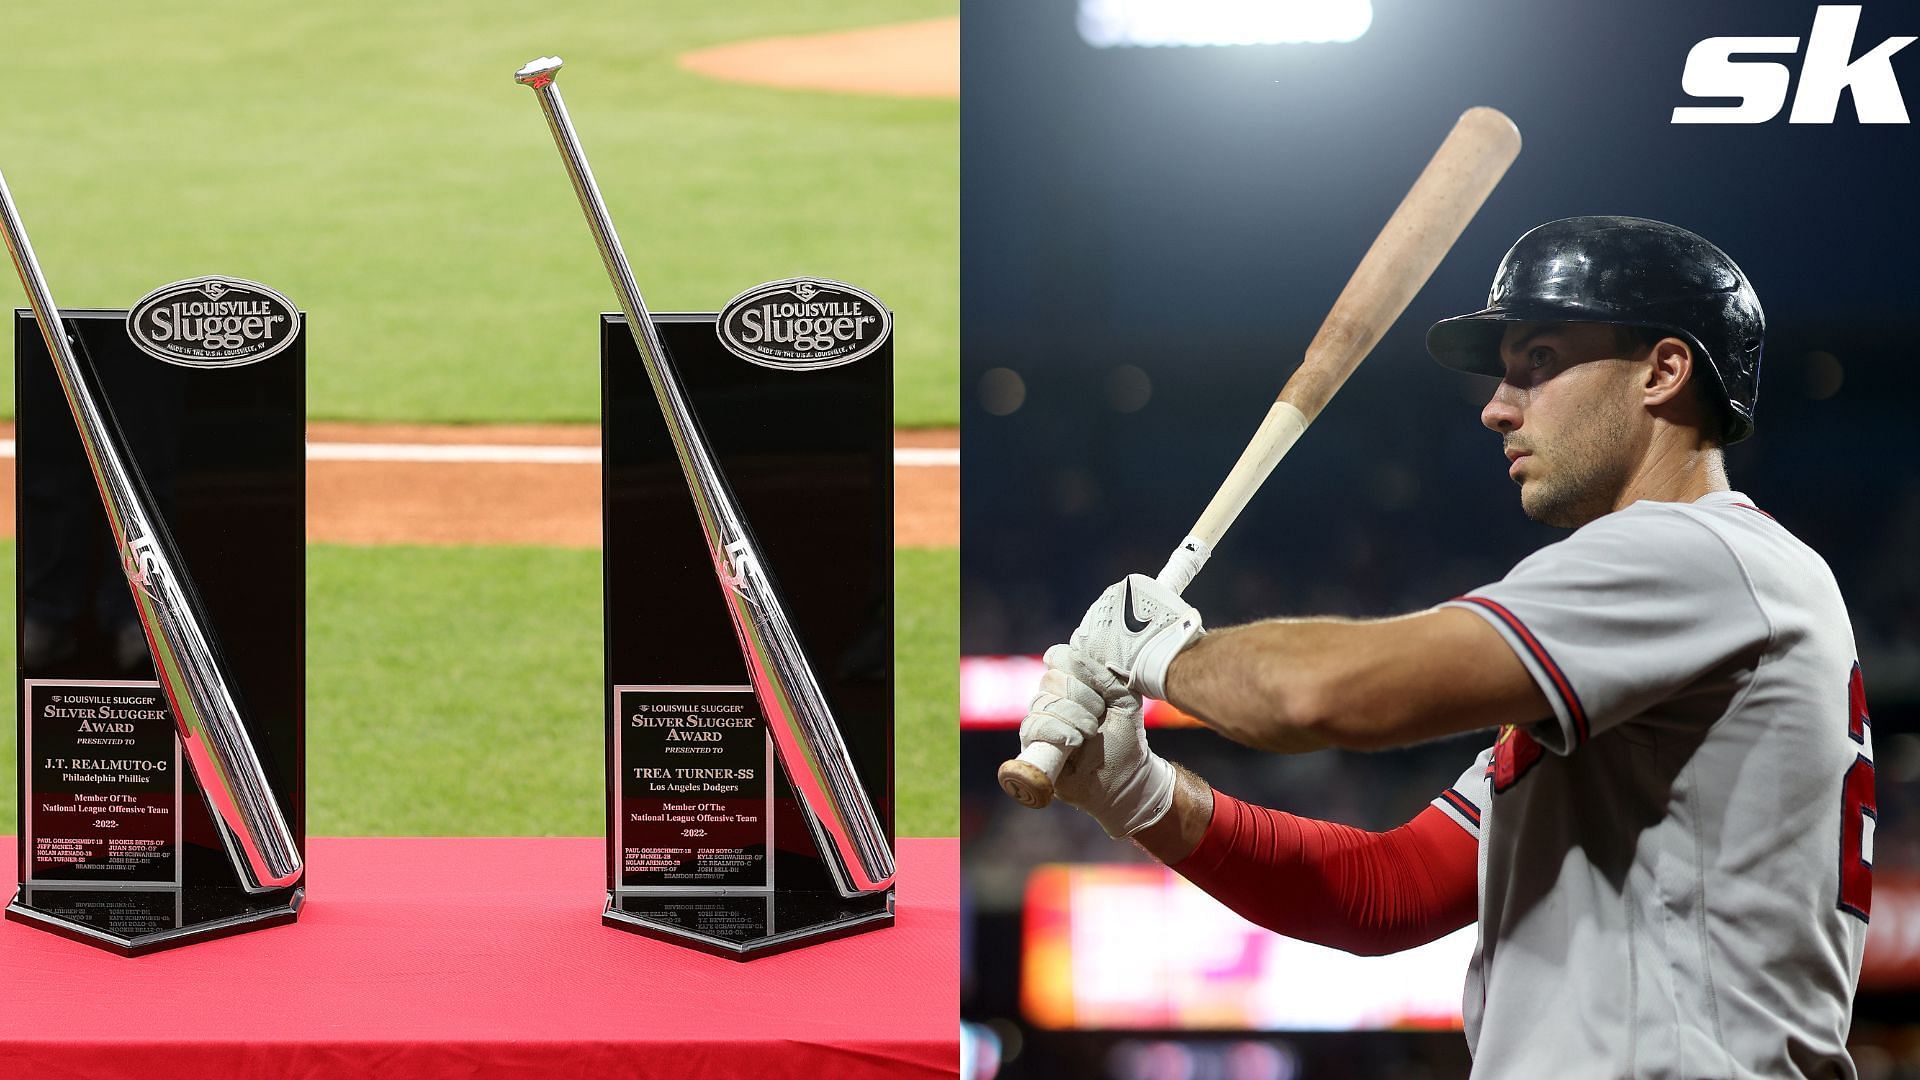 The introduction of new Silver Slugger award for top offensive teams leaves fans scratching their heads